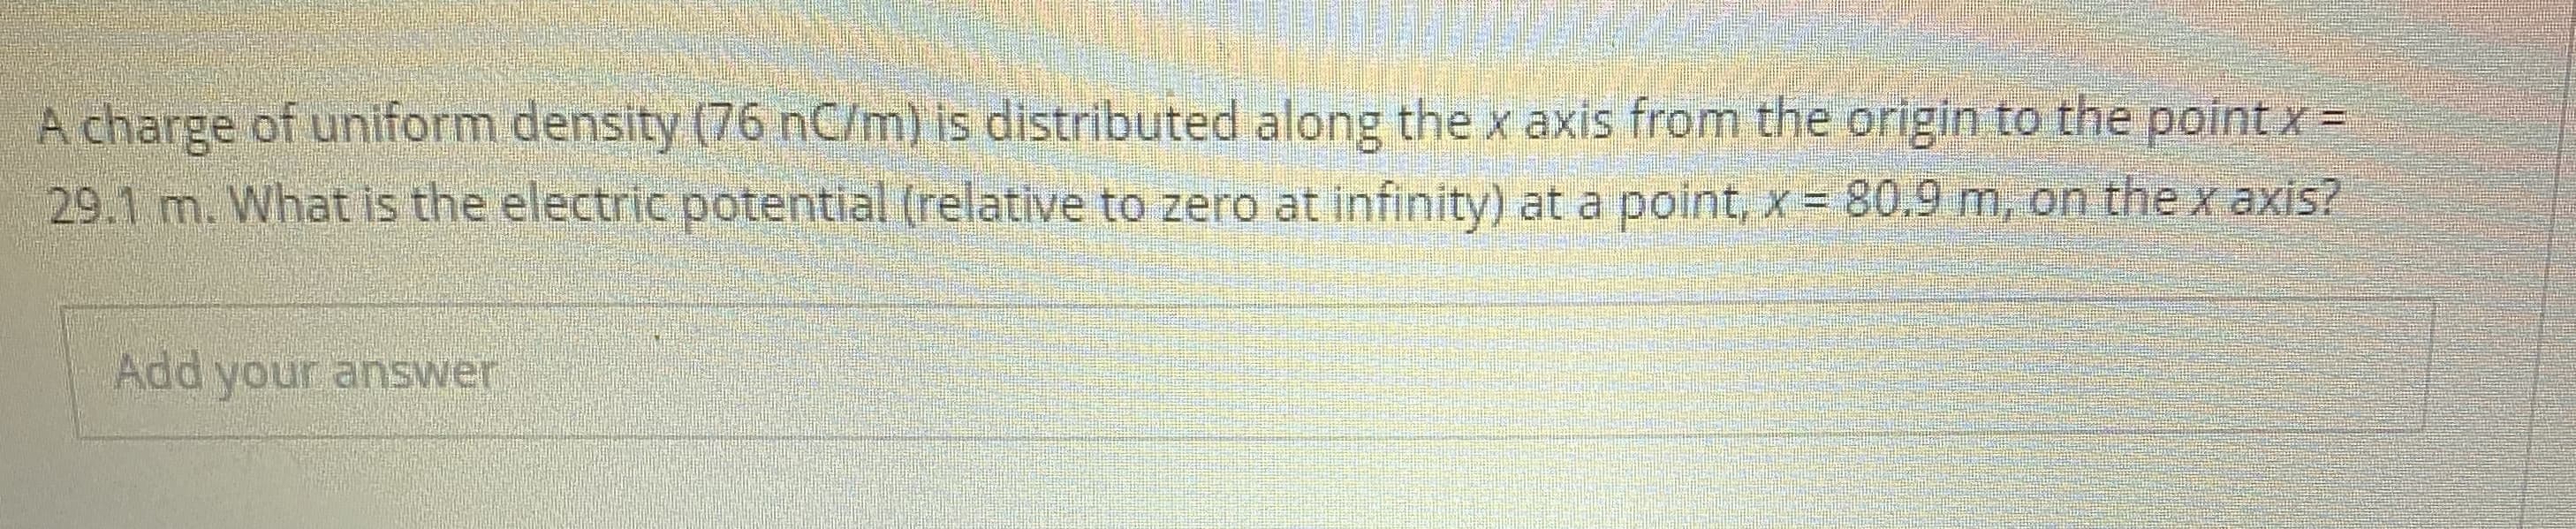 A charge of uniform density (76 nC/m) is distributed along the x axis from the origin to the point x =
29.1 m. What is the electric potential (relative to zero at infinity) at a point, x = 80.9 m, on the x axis?
